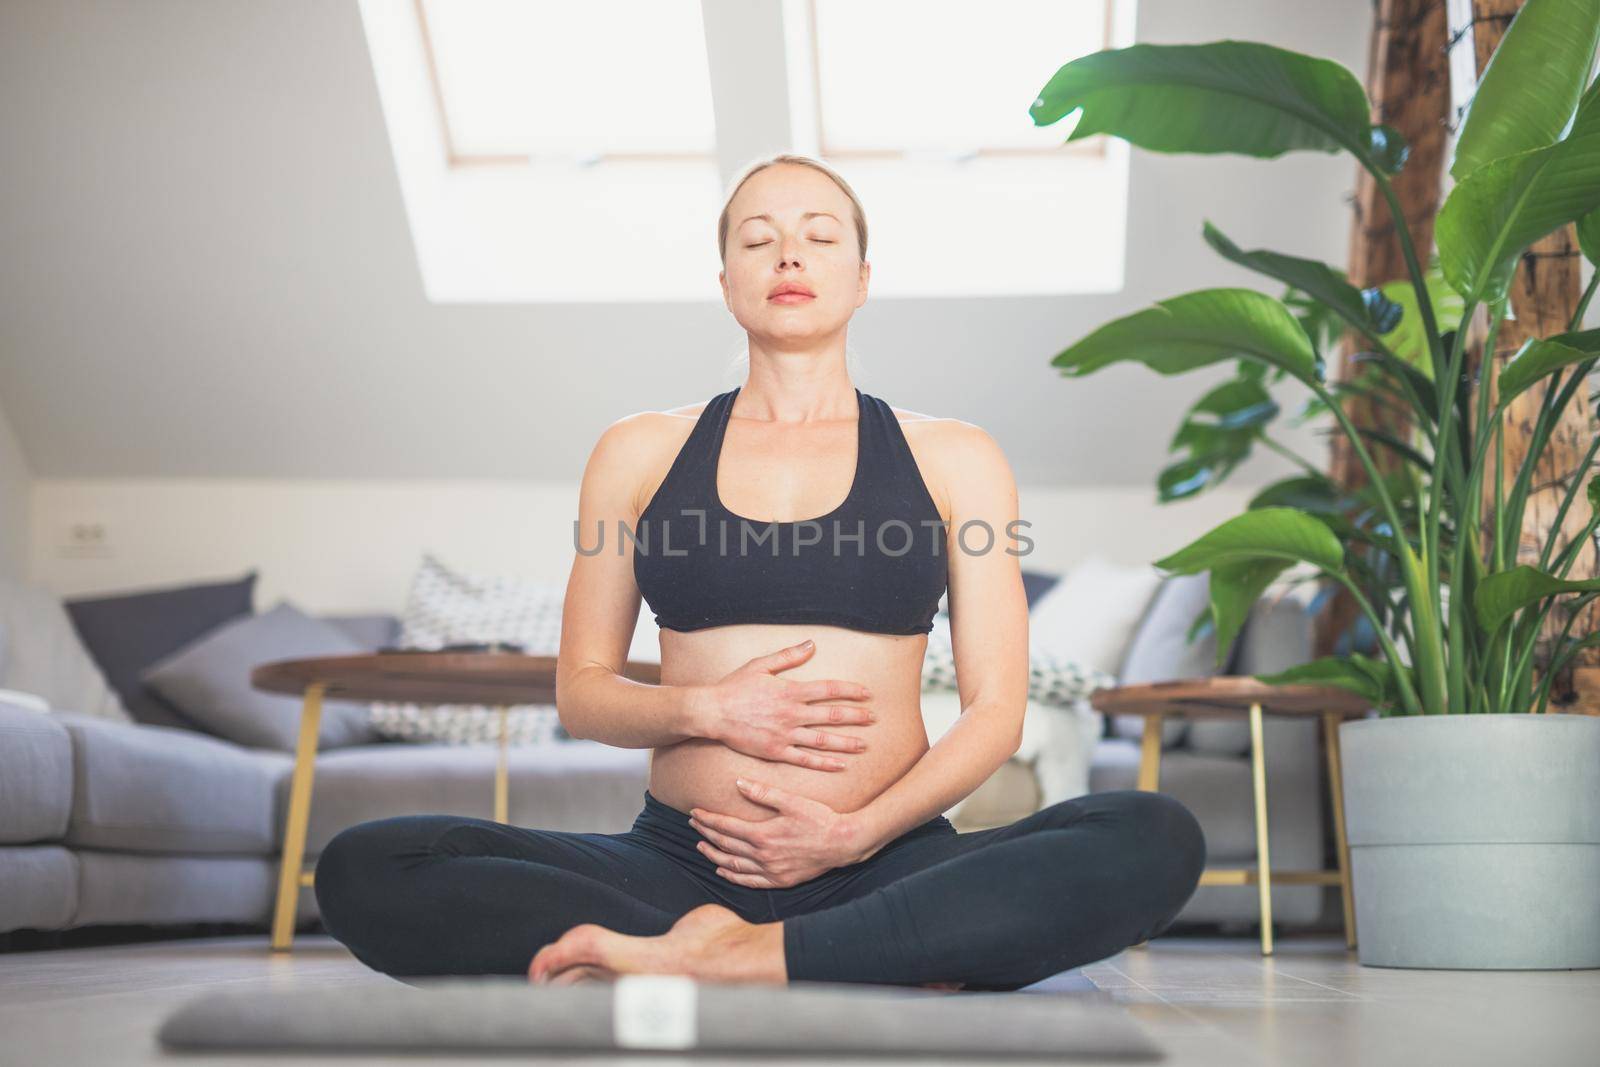 Young beautiful pregnant woman training yoga, caressing her belly. Young happy expectant relaxing, thinking about her baby and enjoying her future life. Motherhood, pregnancy, yoga concept